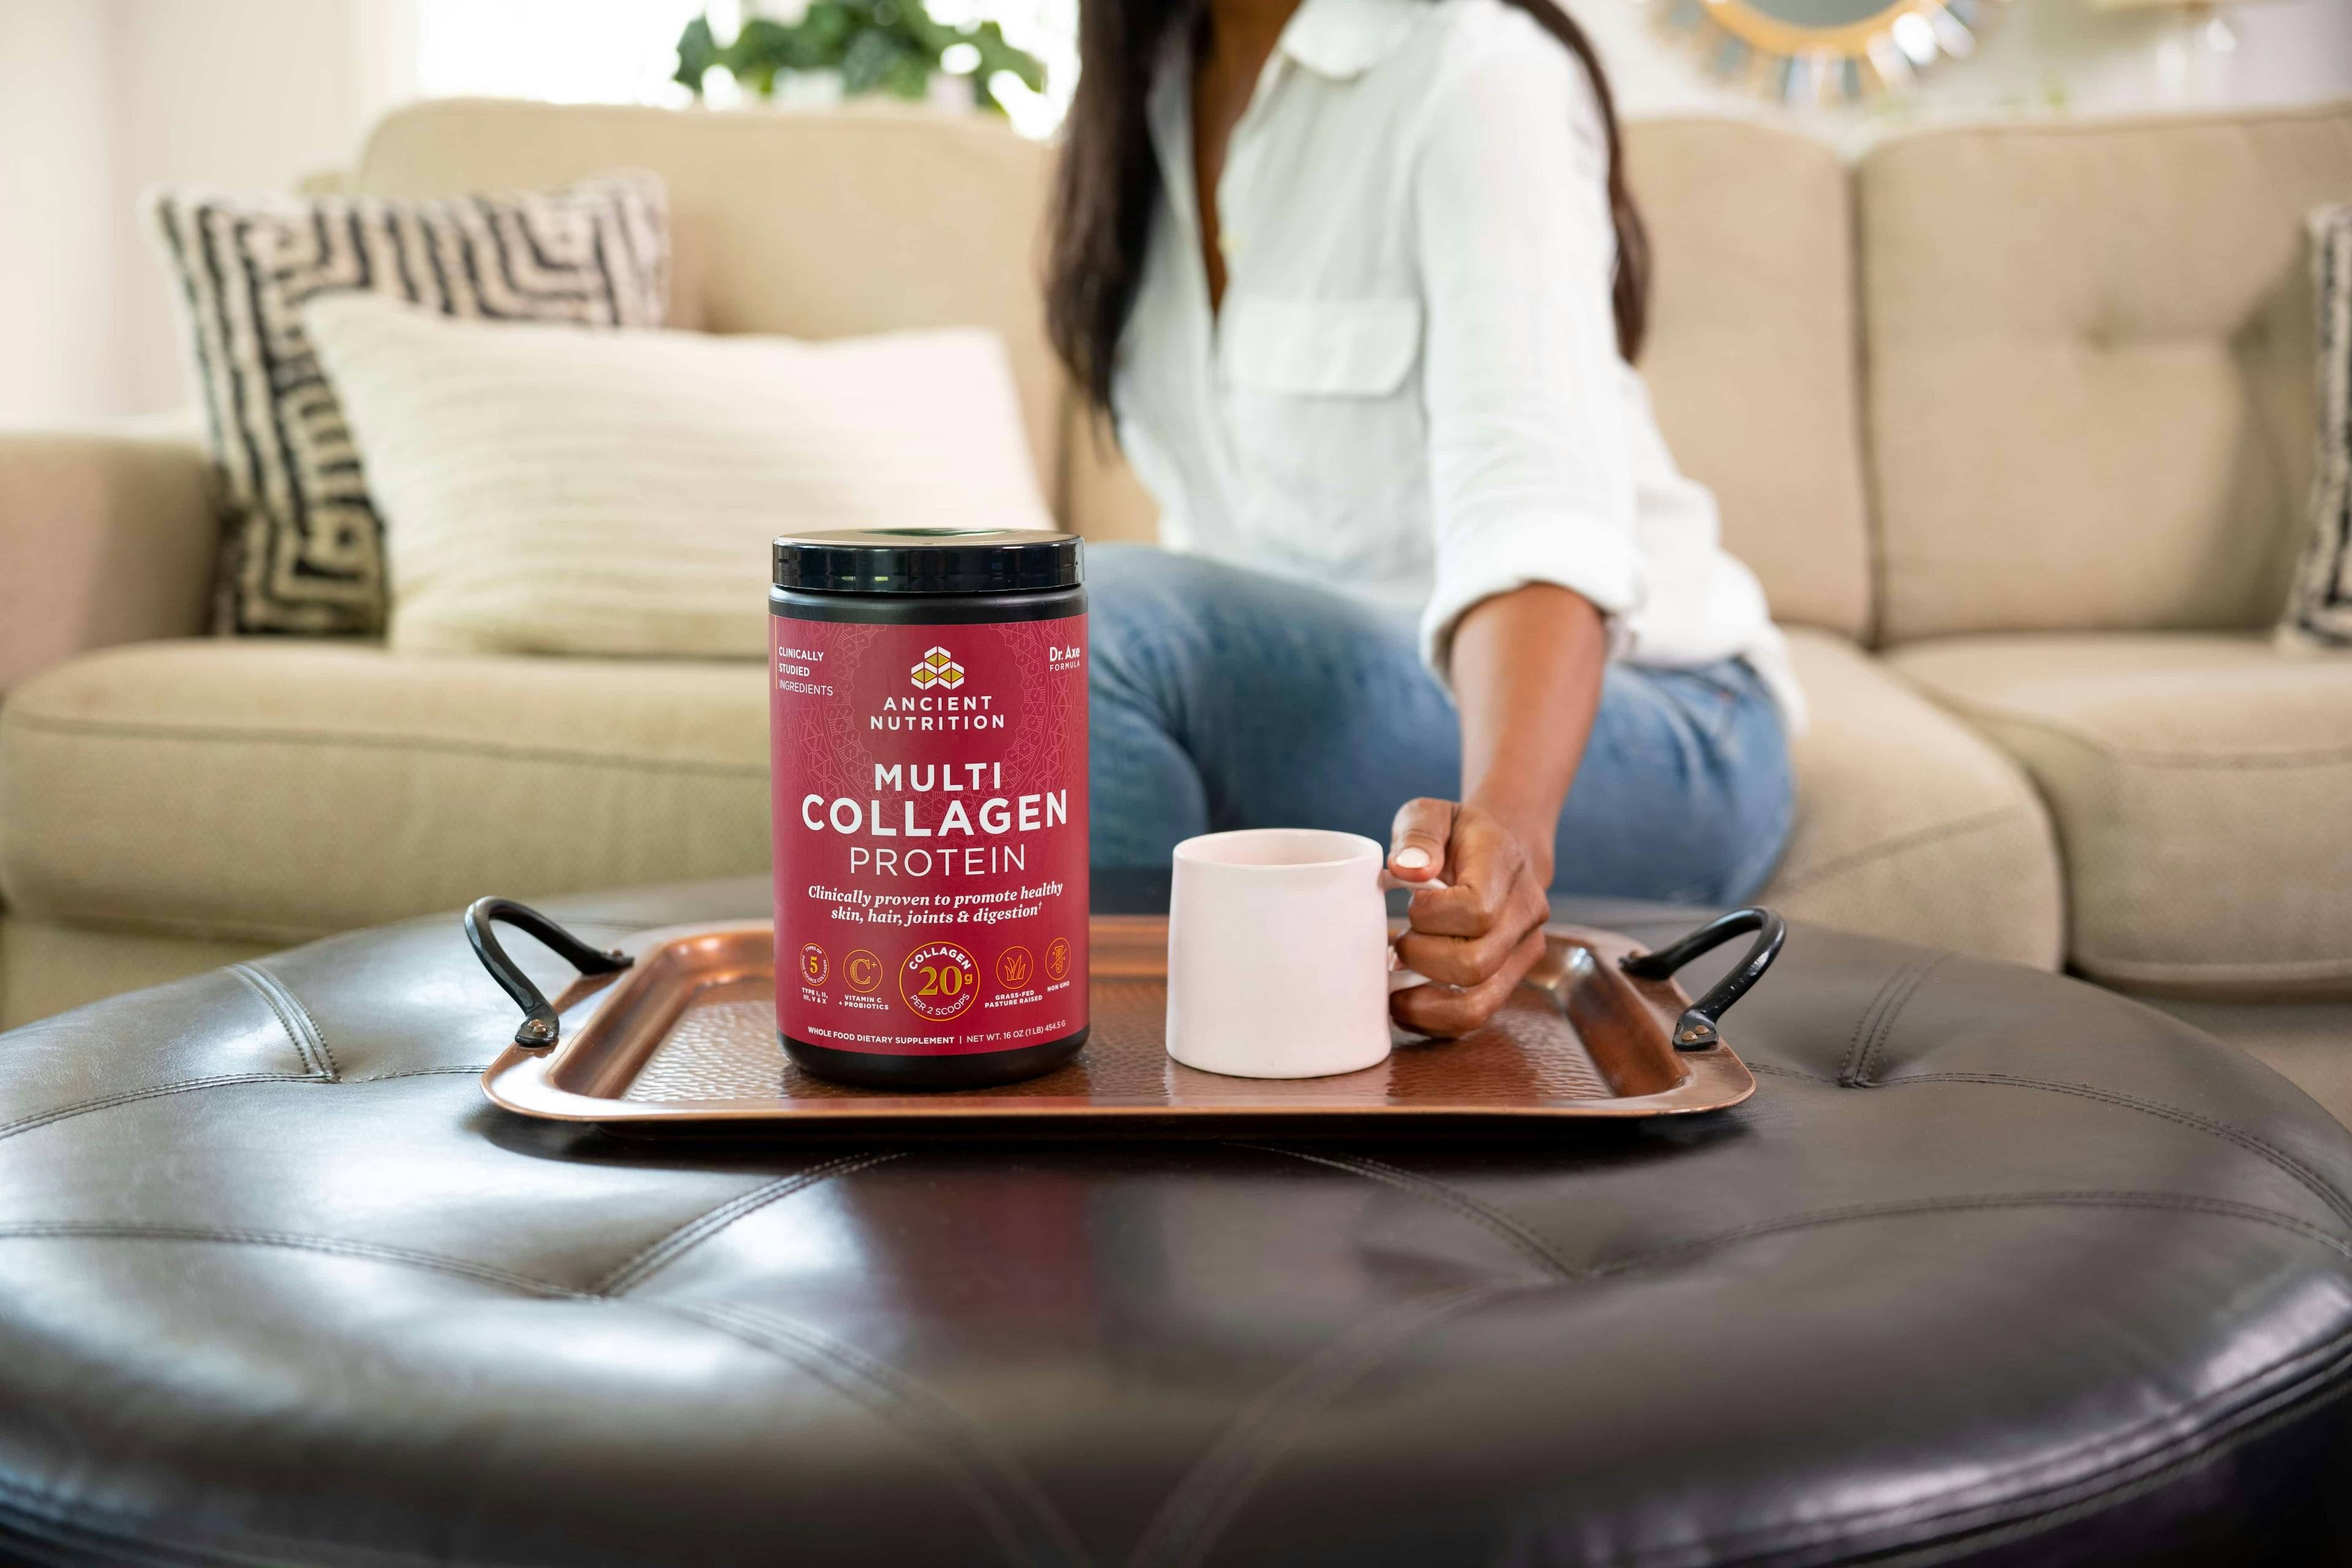 multi collagen protein on a tray in a living room setting